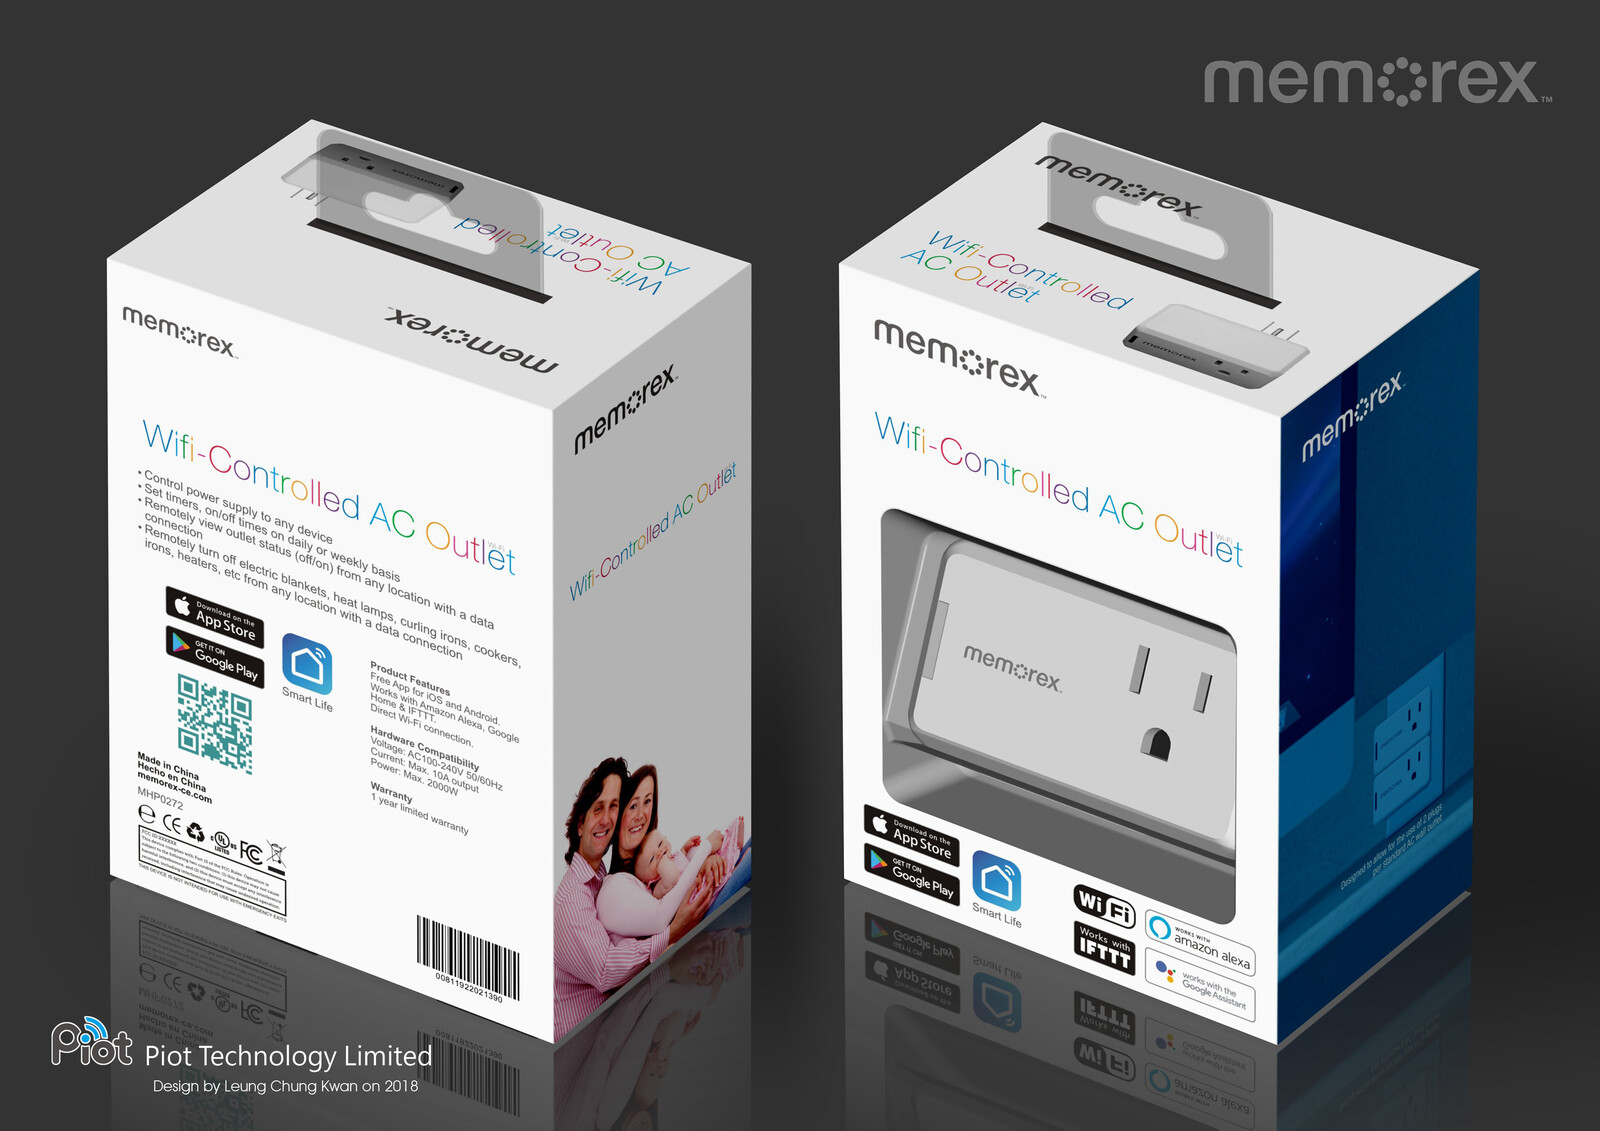 💎 Color Gift Box | Design by Leung Chung Kwan on 2018 💎
Brand Name︰memorex | Client︰Piot Technology Limited
Graphic Design Specification︰http://bit.ly/pi094-v3